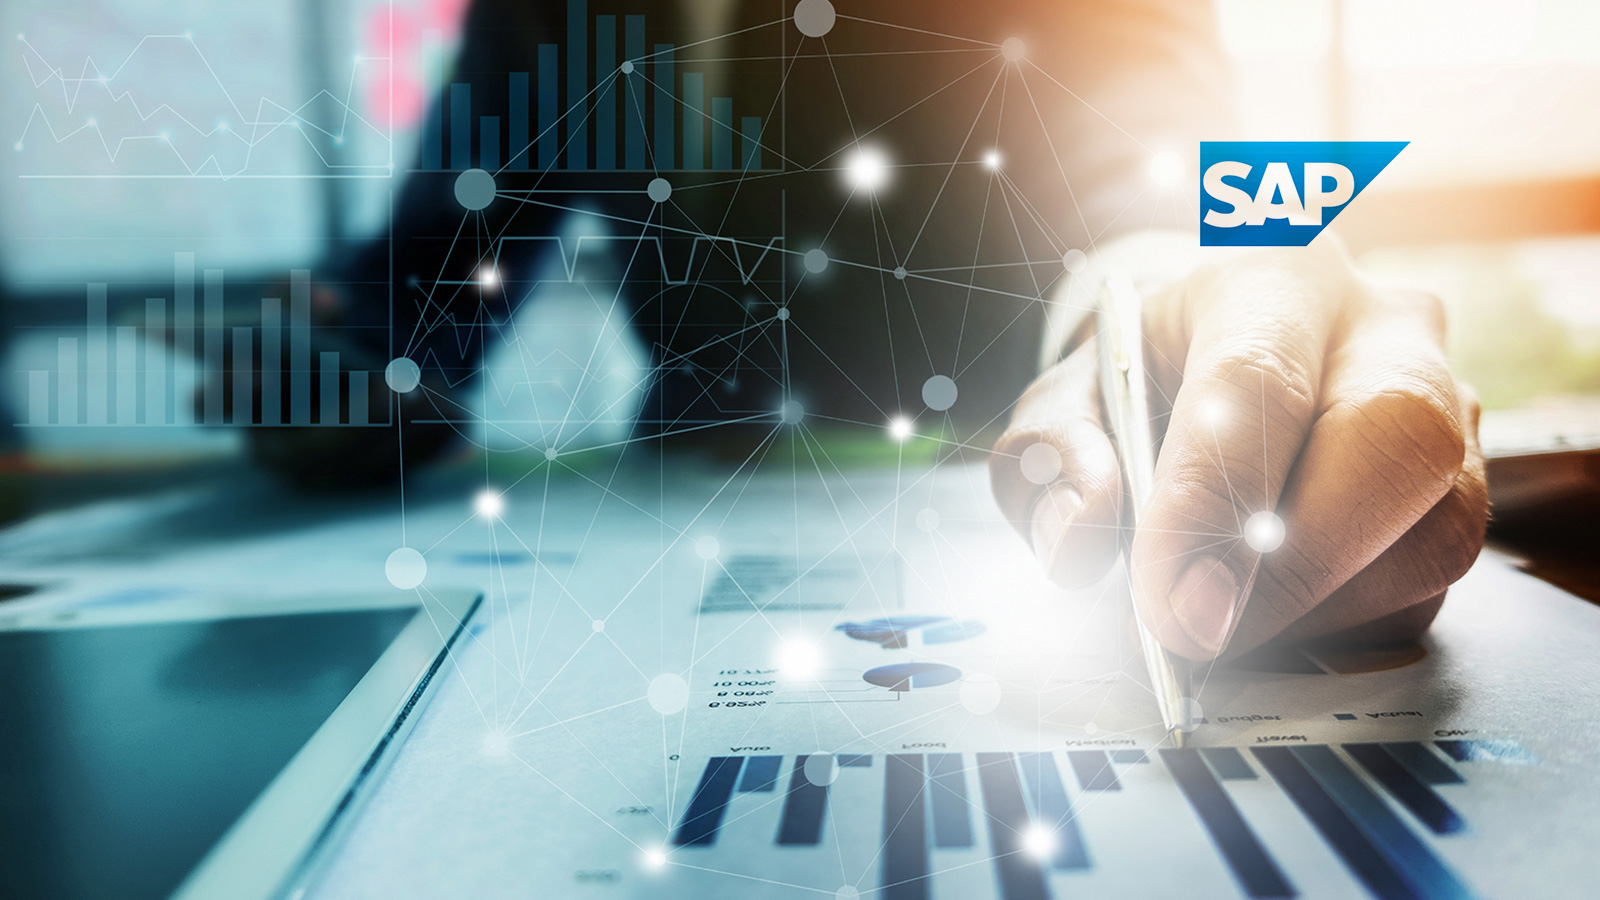 Sap Extends Its Leadership In Ai Powered Intelligent Erp With S 4hana